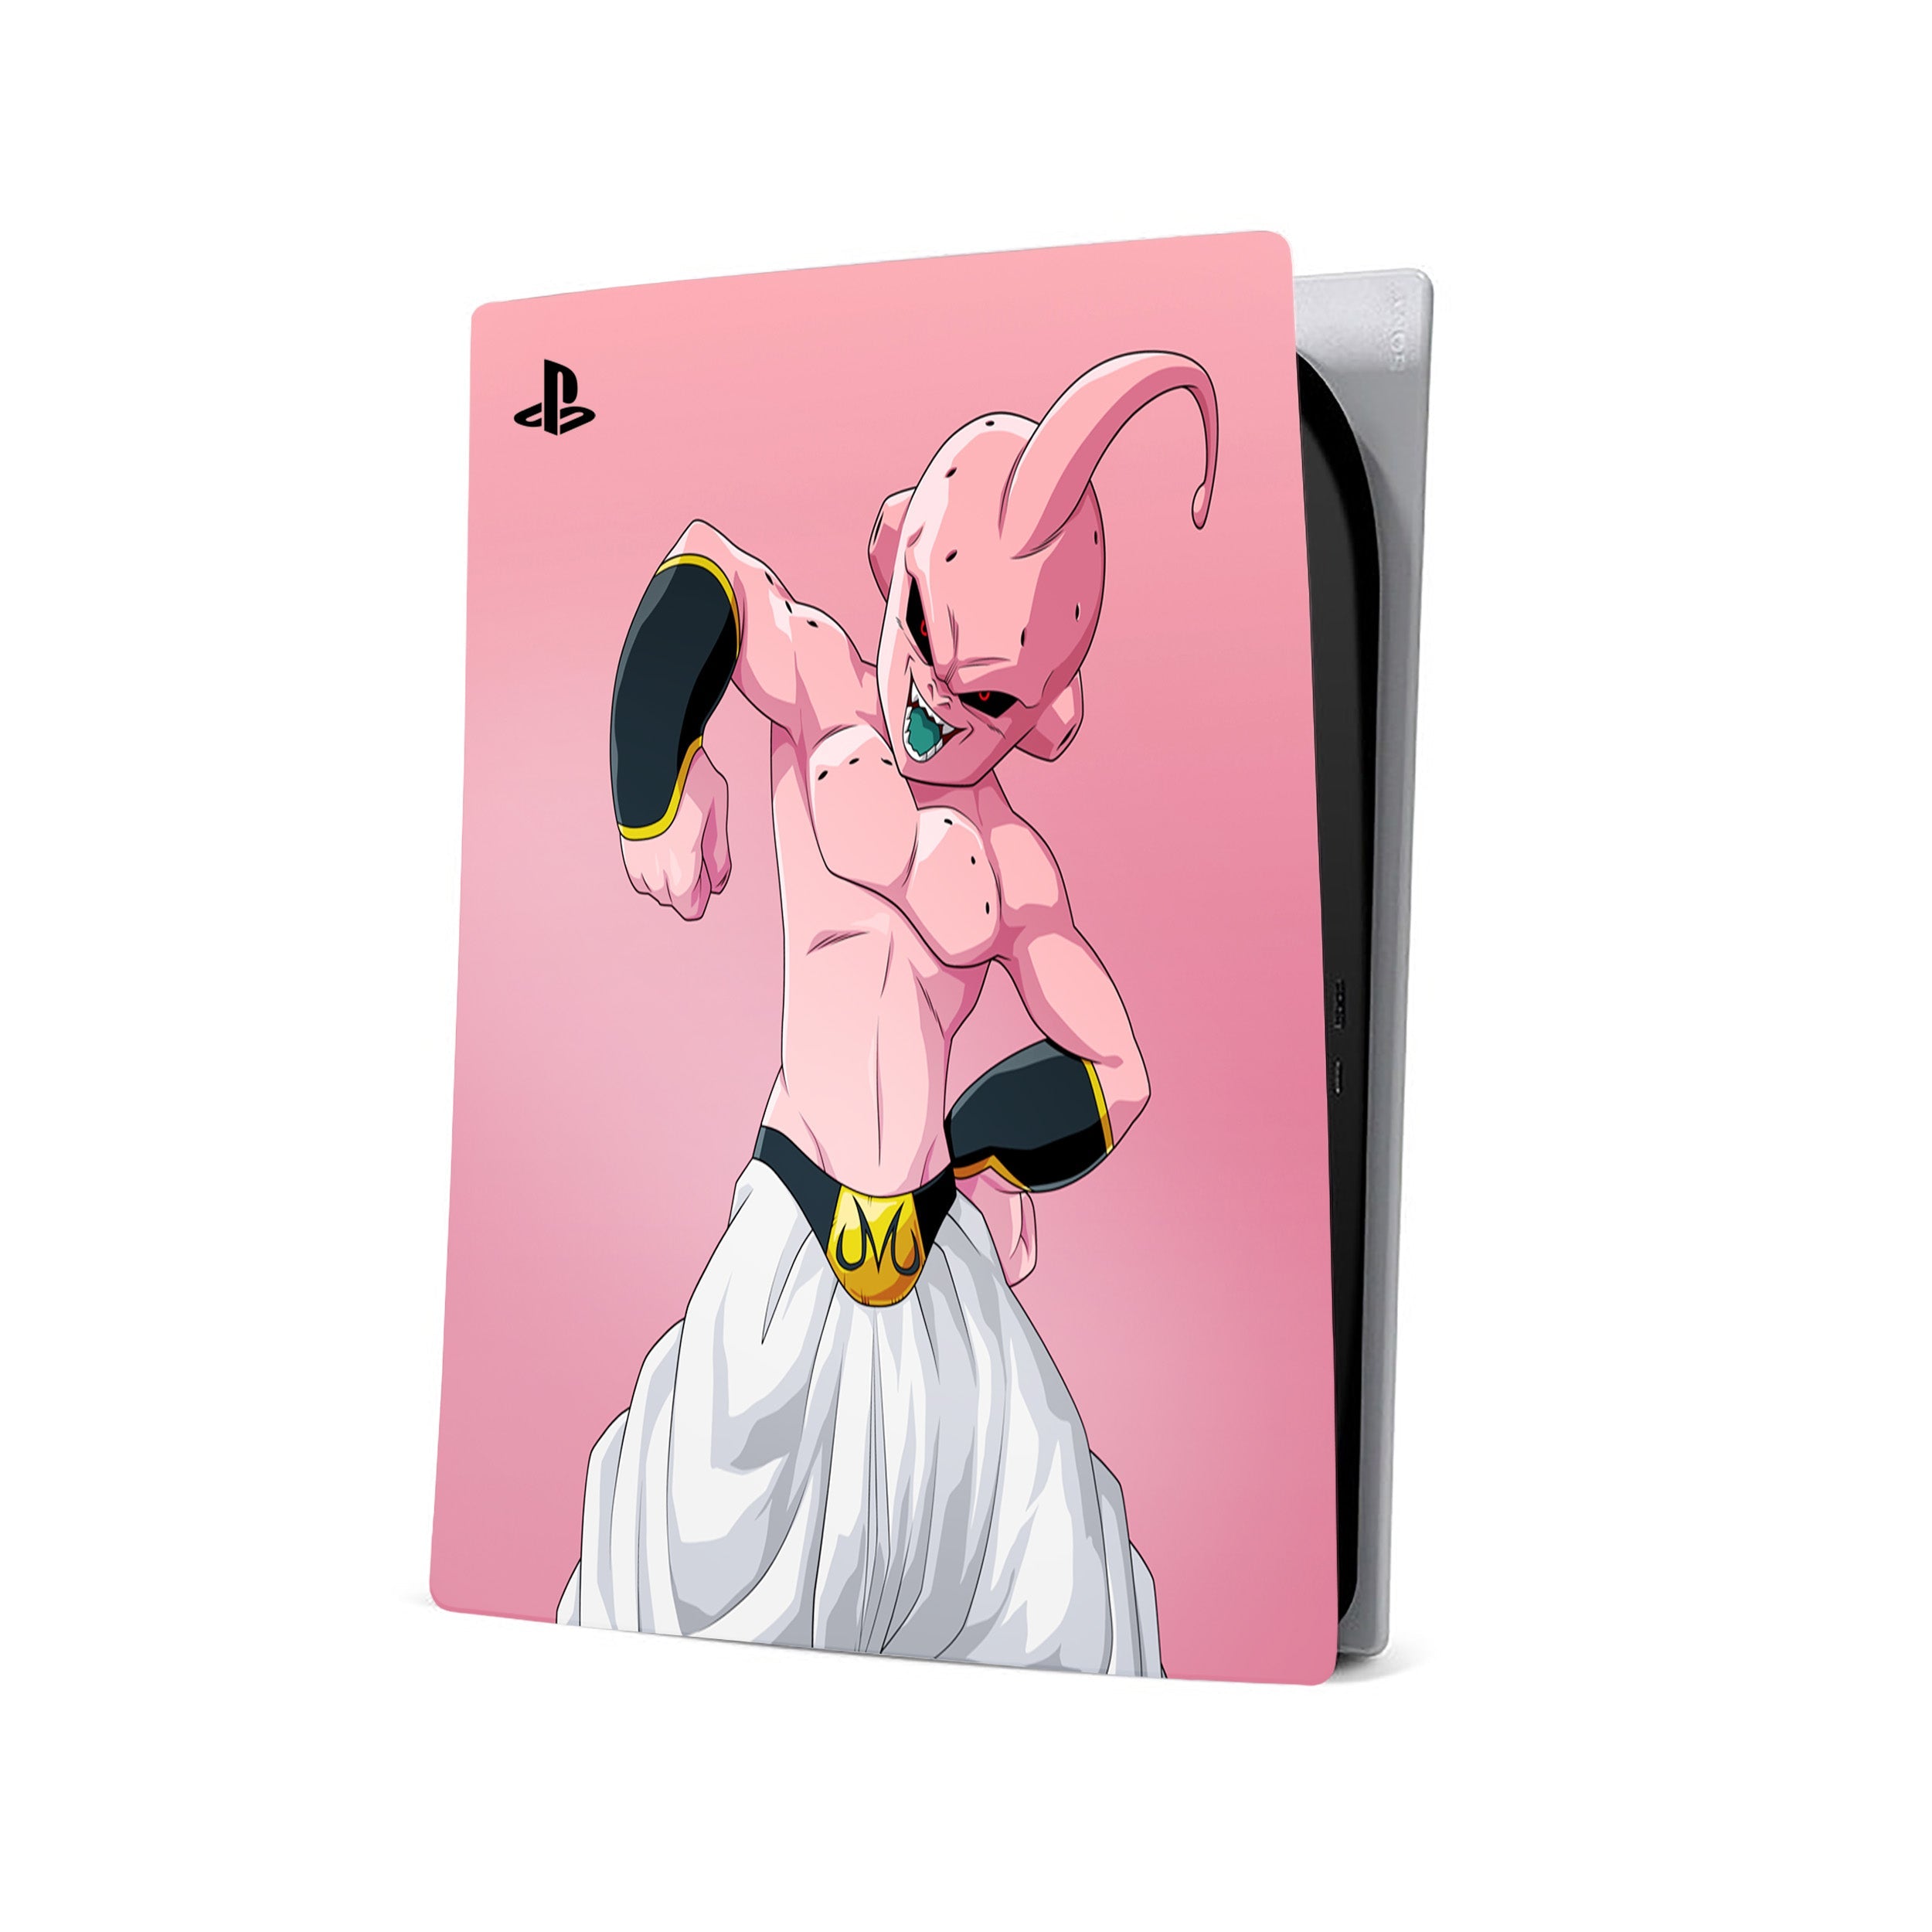 A video game skin featuring a Dragon Ball Z Majin Buu design for the PS5.